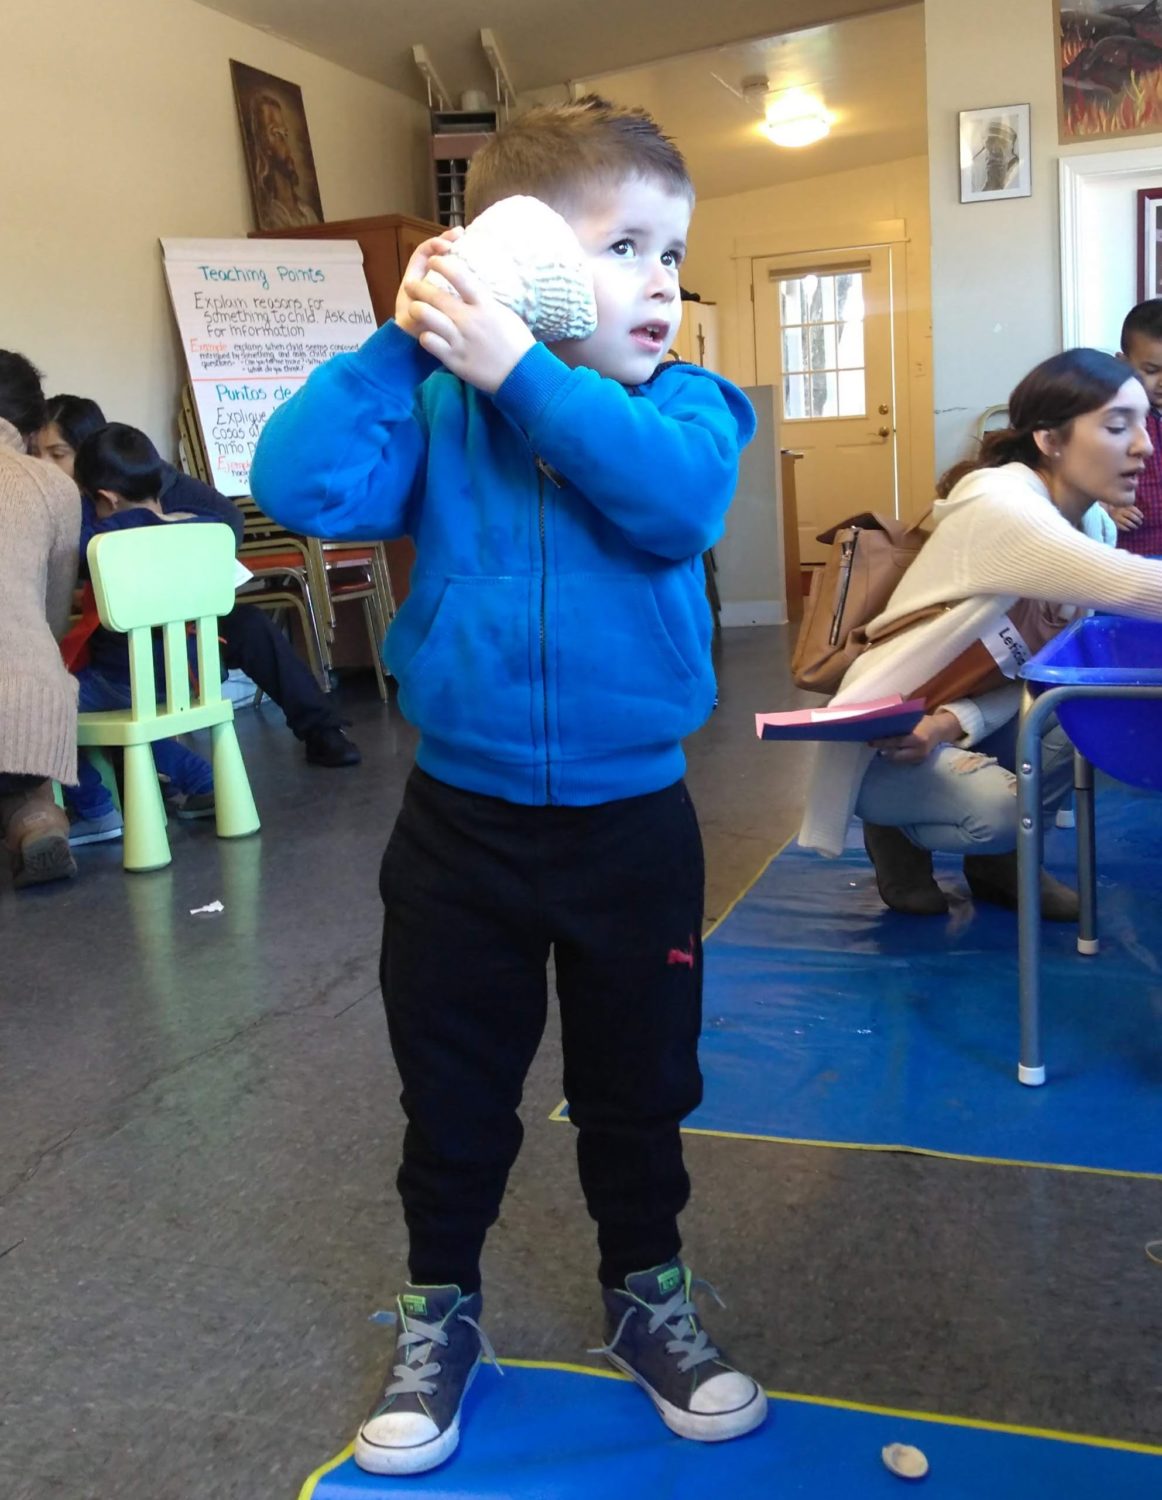 A child is actively performing a physical fitness exercise indoors, with their elbows joined together in a blue position.